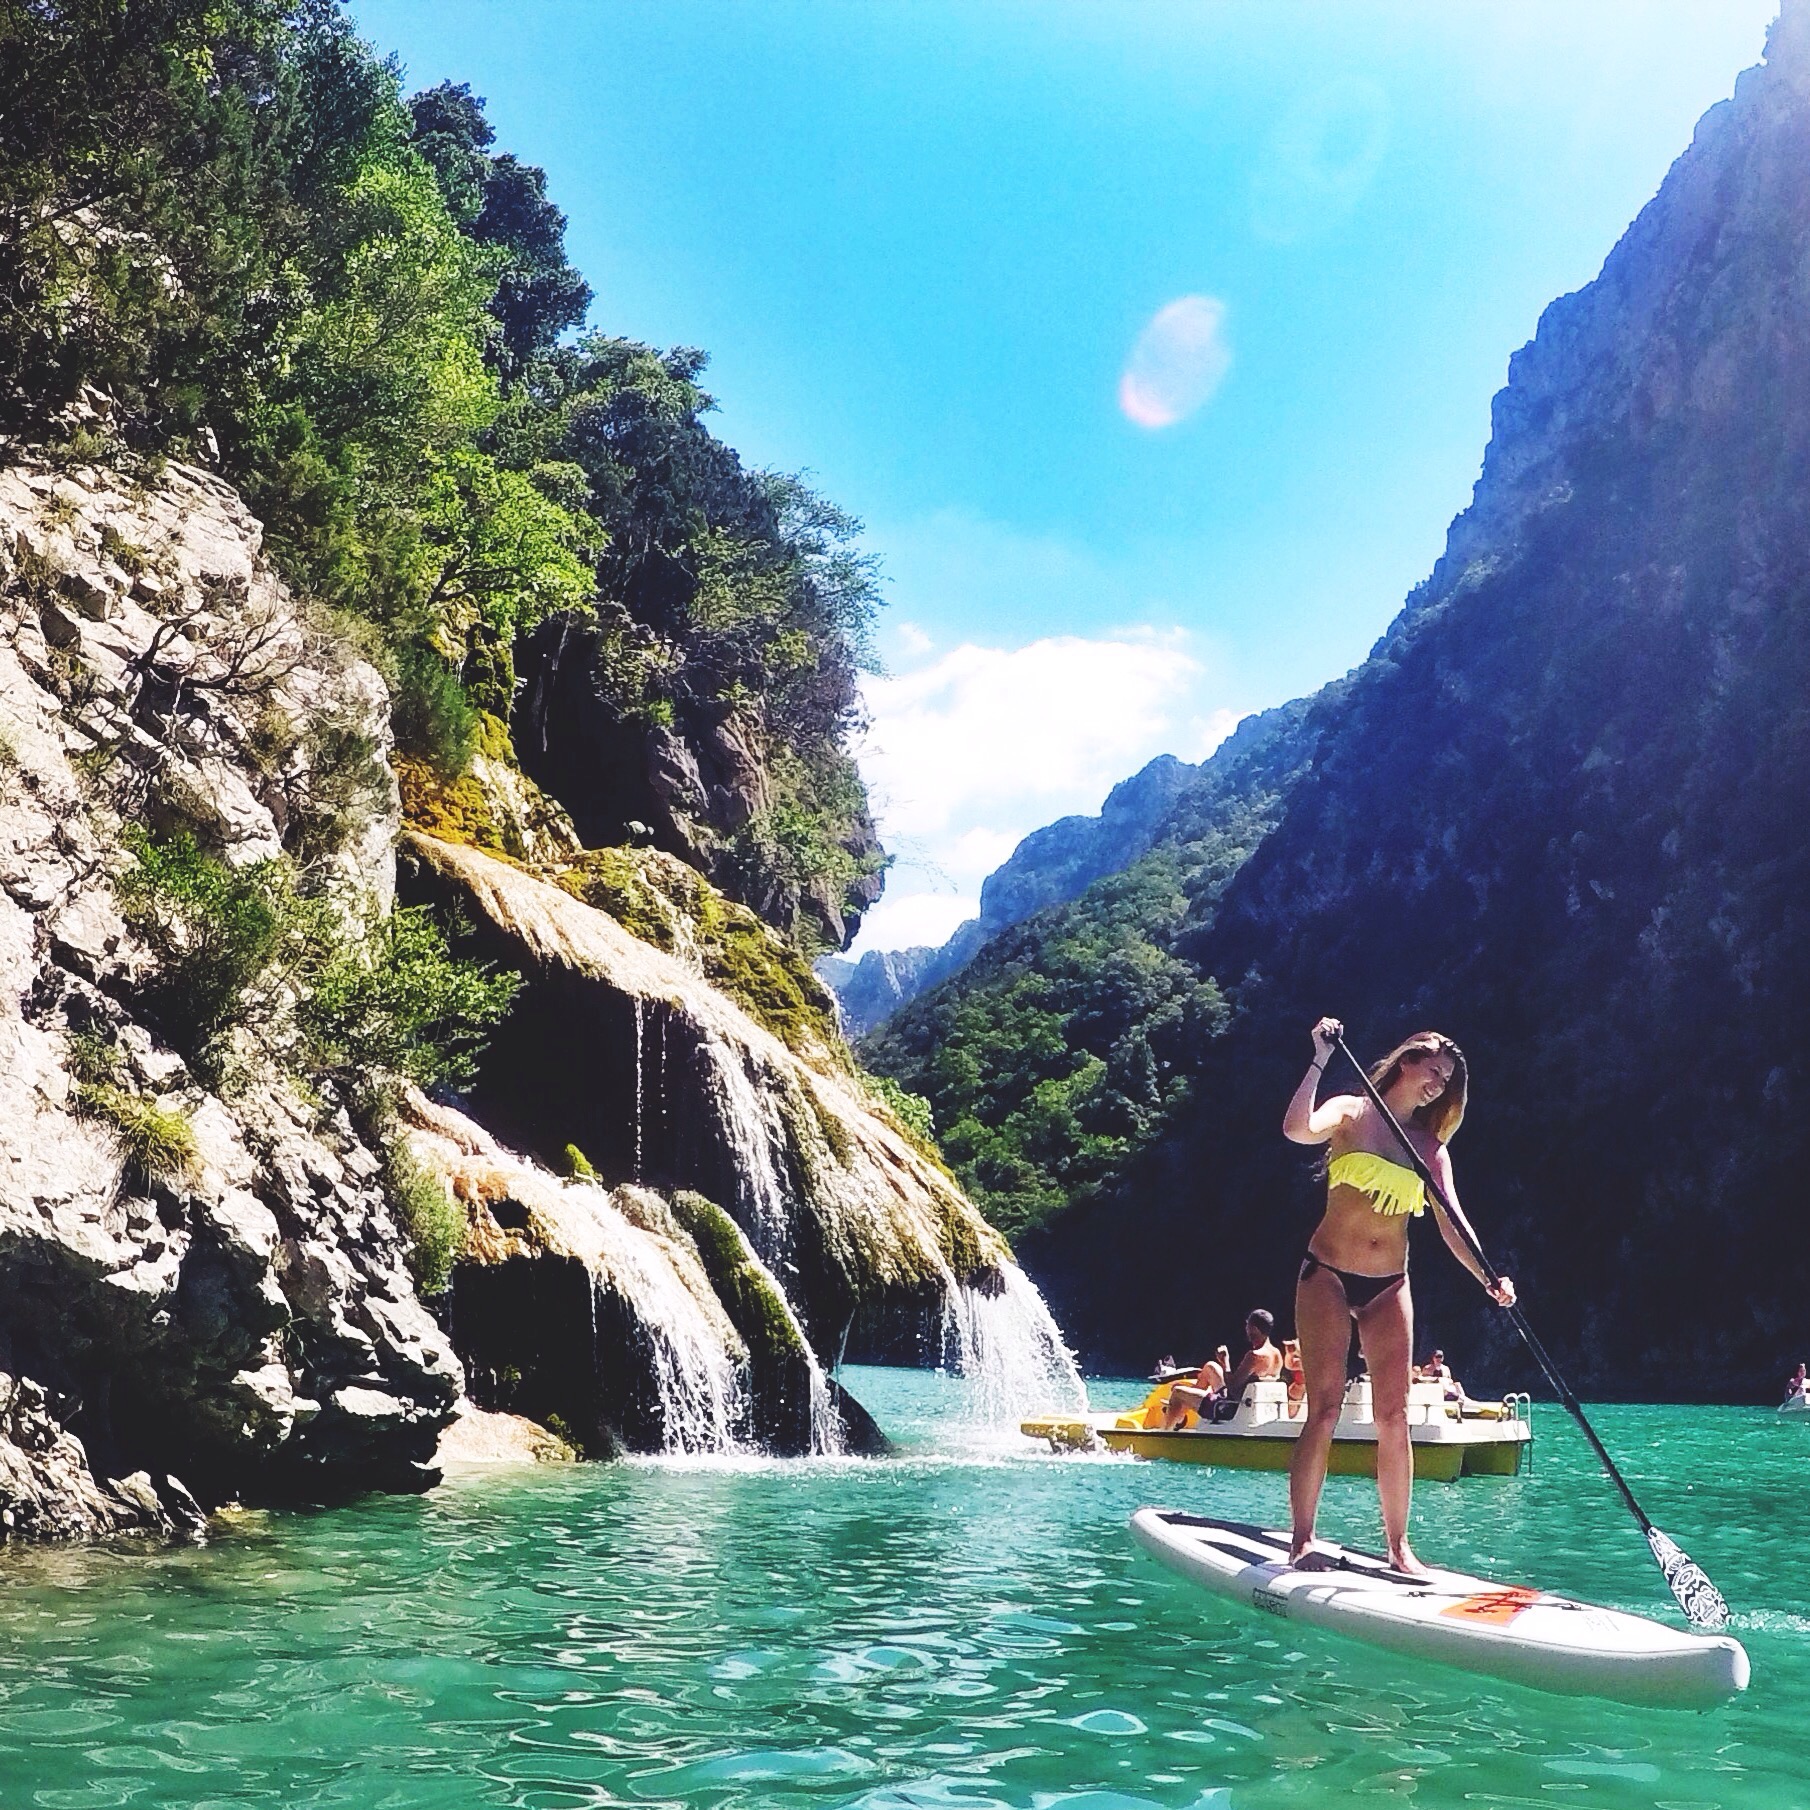 Trying Stand-Up Paddle for the First Time - Les Gorges du Verdon - Provence - Côte d'Azur - South of France (French Riviera)